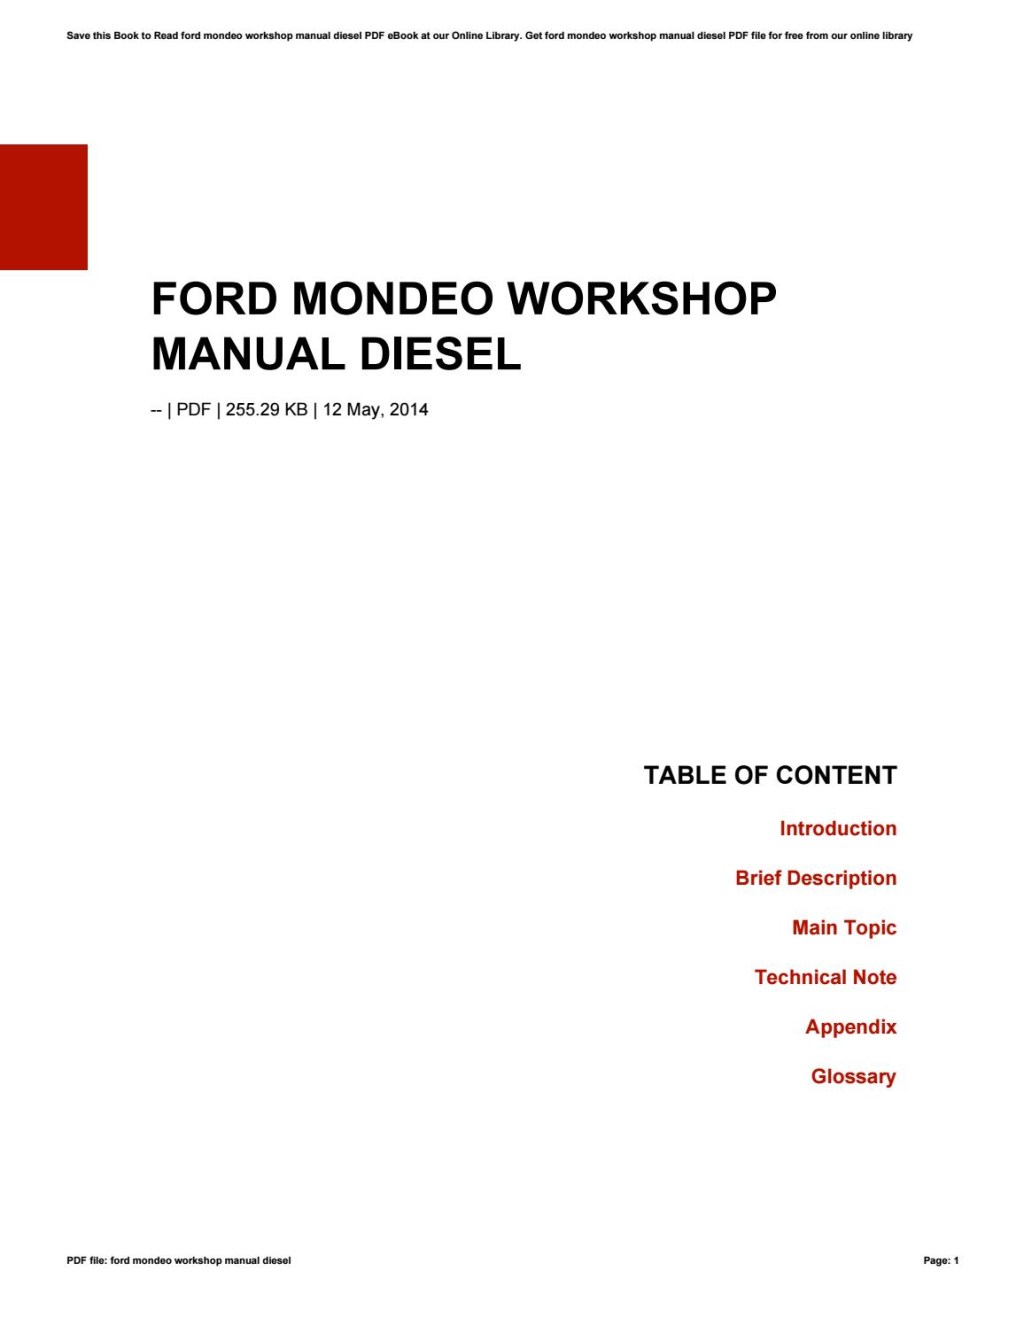 Picture of: Ford mondeo workshop manual diesel by tmmail – Issuu